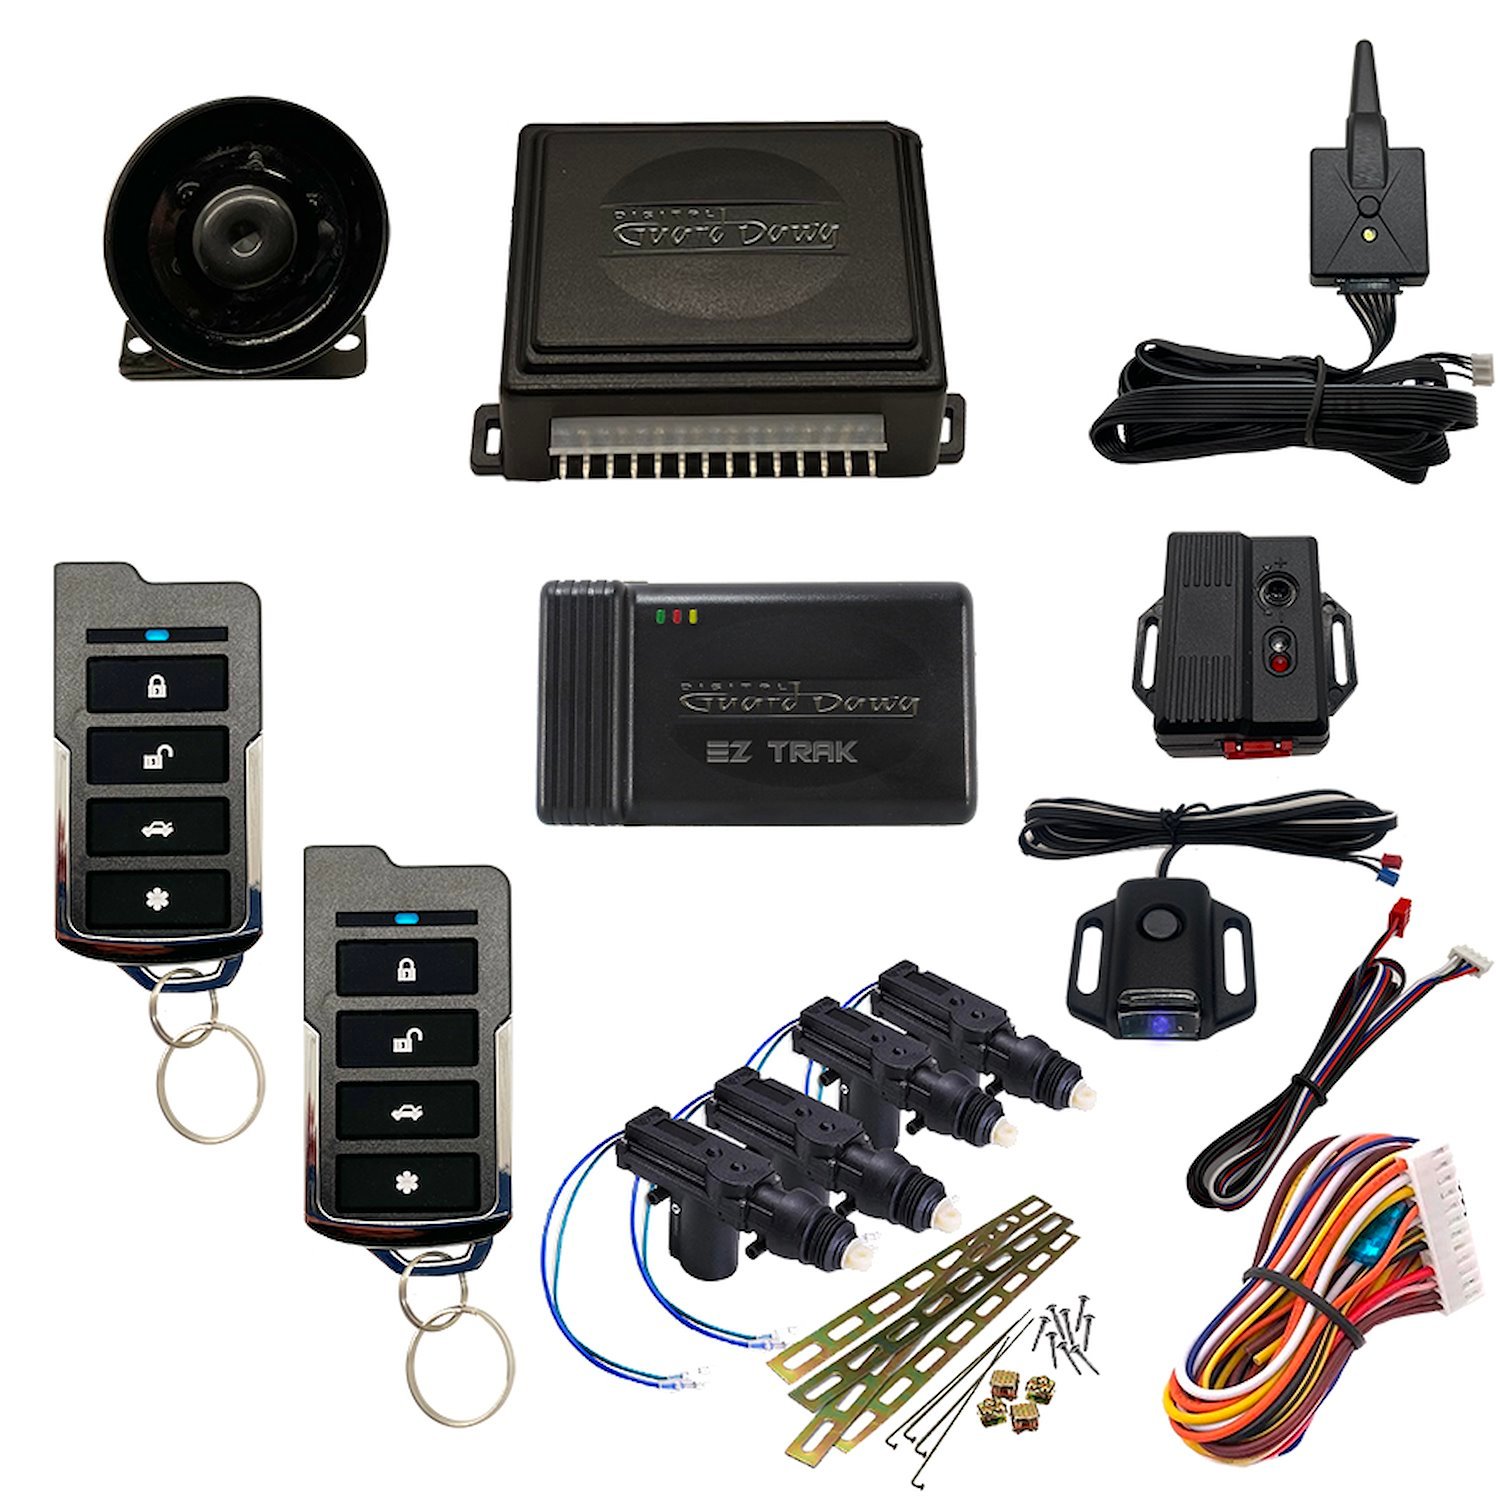 DGD-KY-ALM-1-4A-EZ Keyless Entry and Alarm System, 1-Way, w/4-Door Actuator Kit and Smart Phone EZ-Tracking